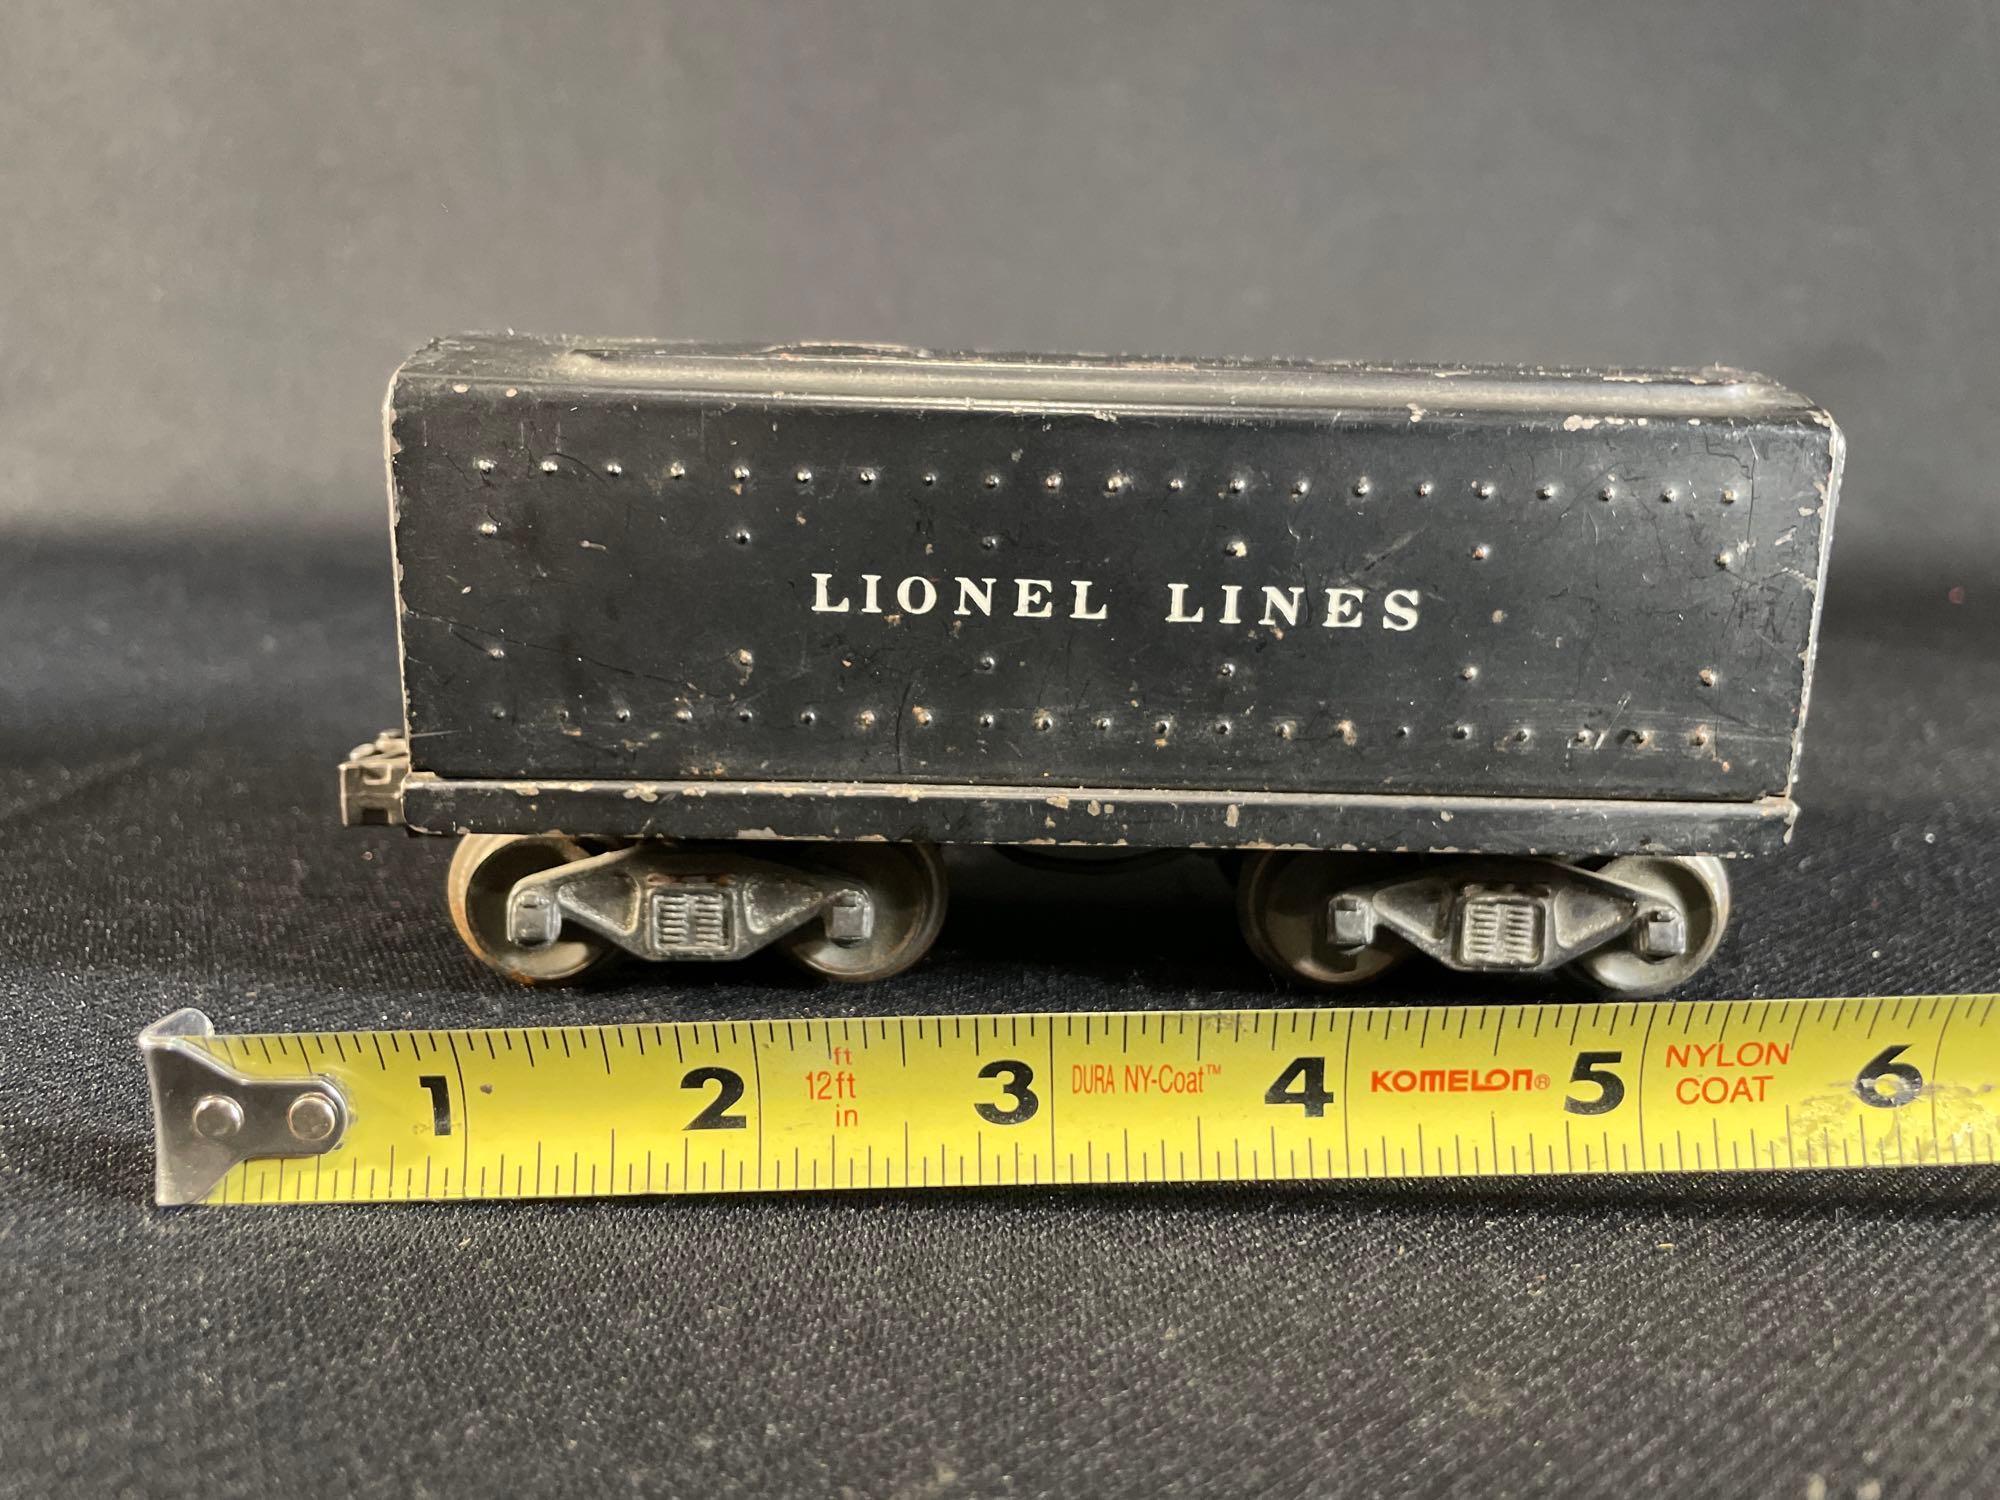 Lionel New York central lines train set w/ controller & large assortment of track -see photo's-